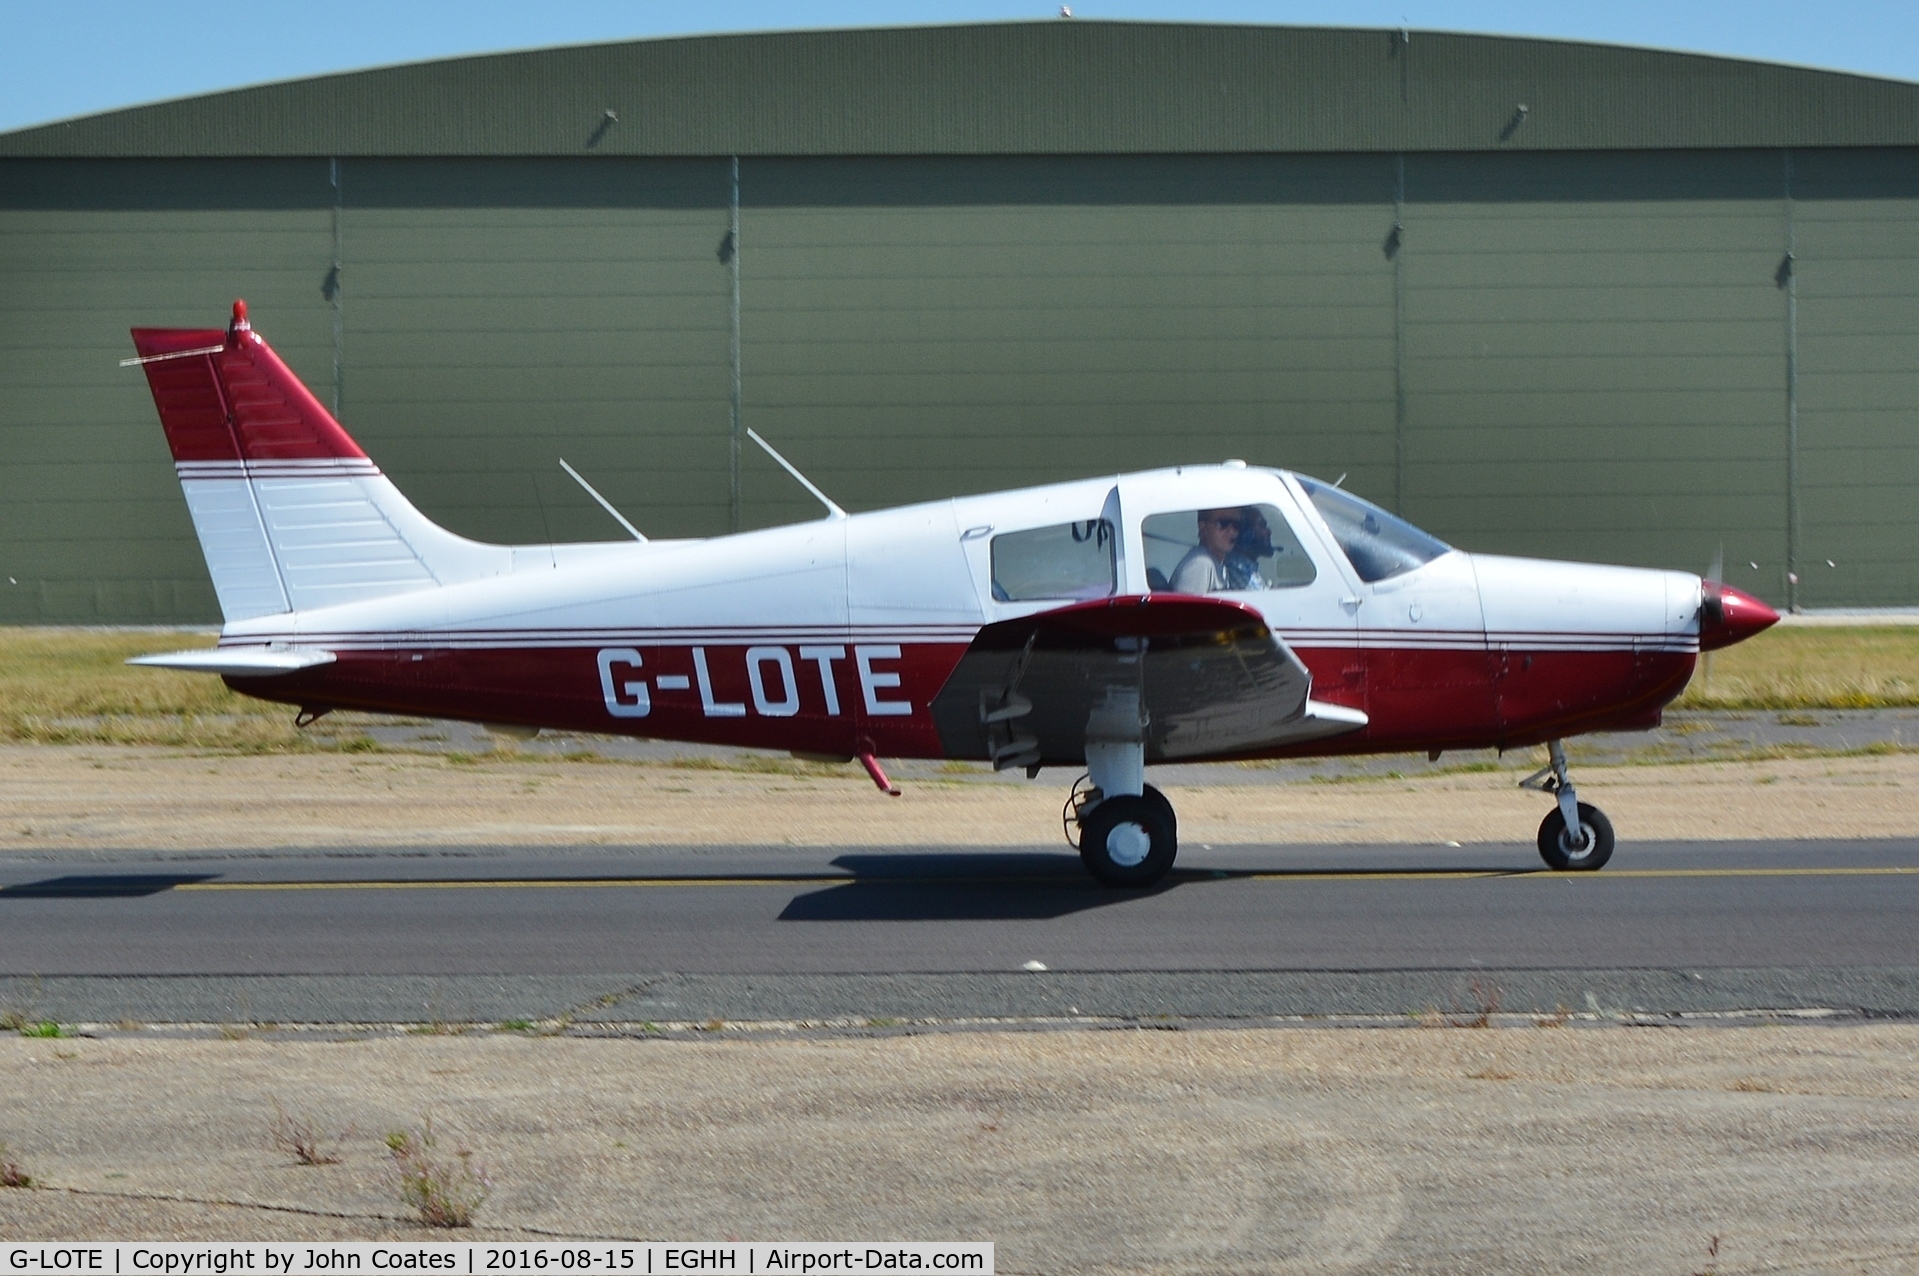 G-LOTE, 1989 Piper PA-28-161 Cadet C/N 2841089, Resident departing